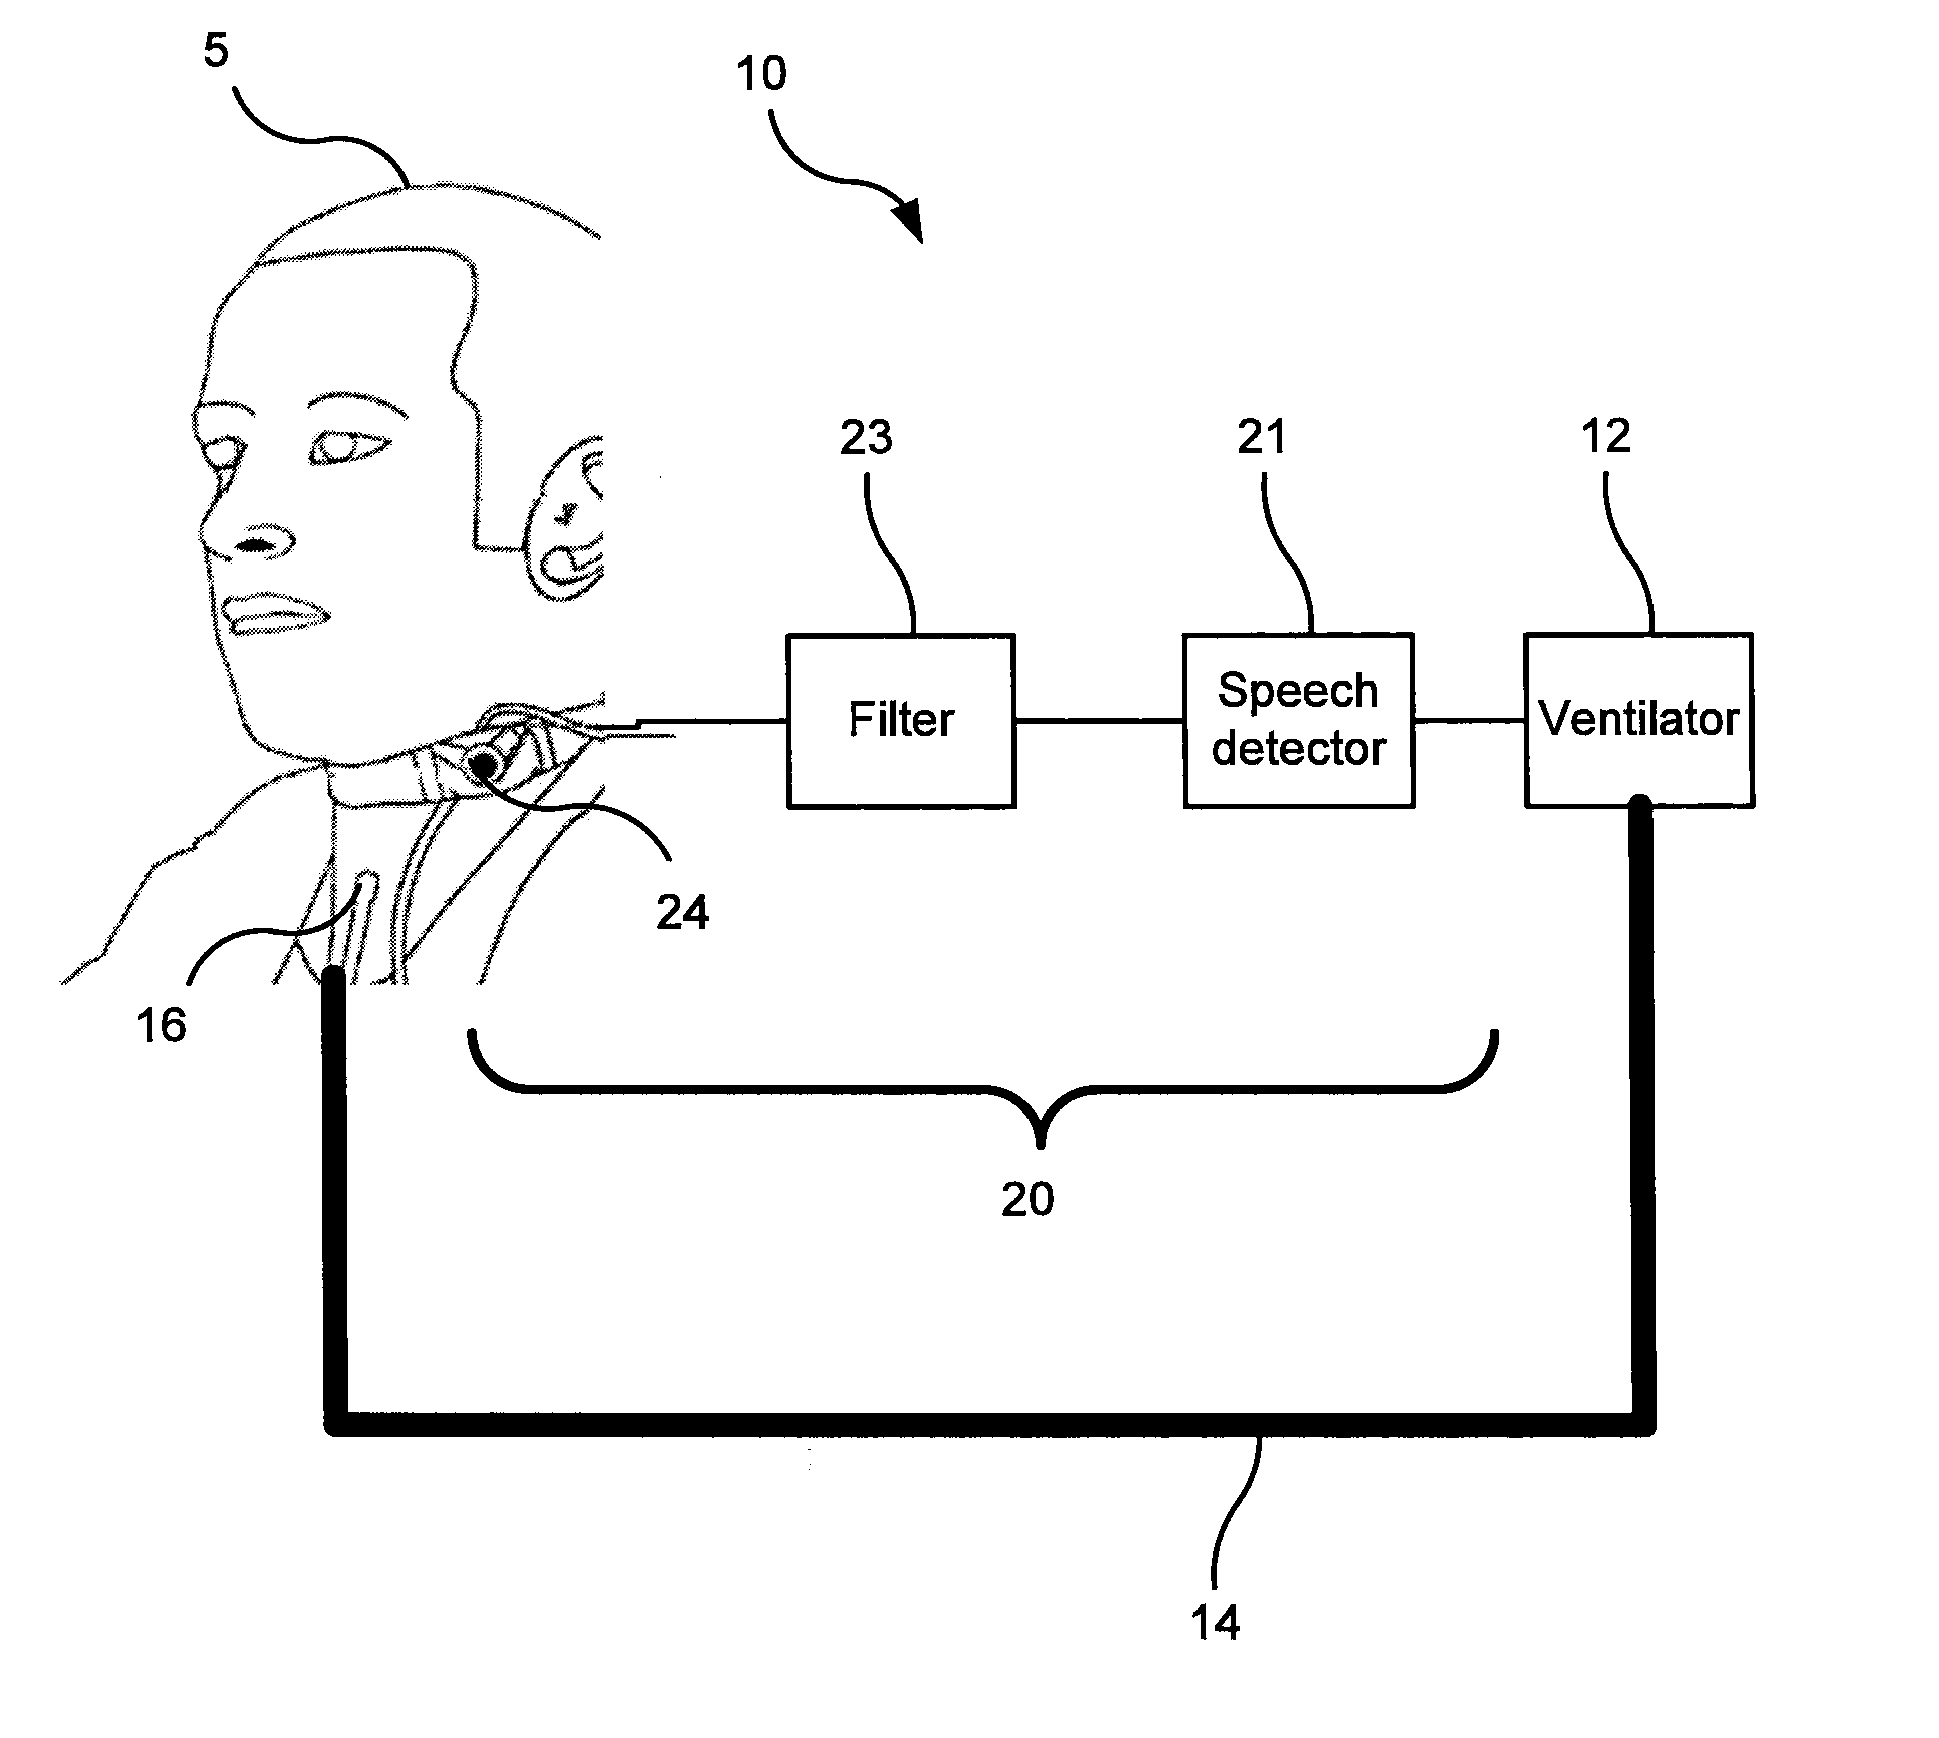 Breathing assistance system with speech detection